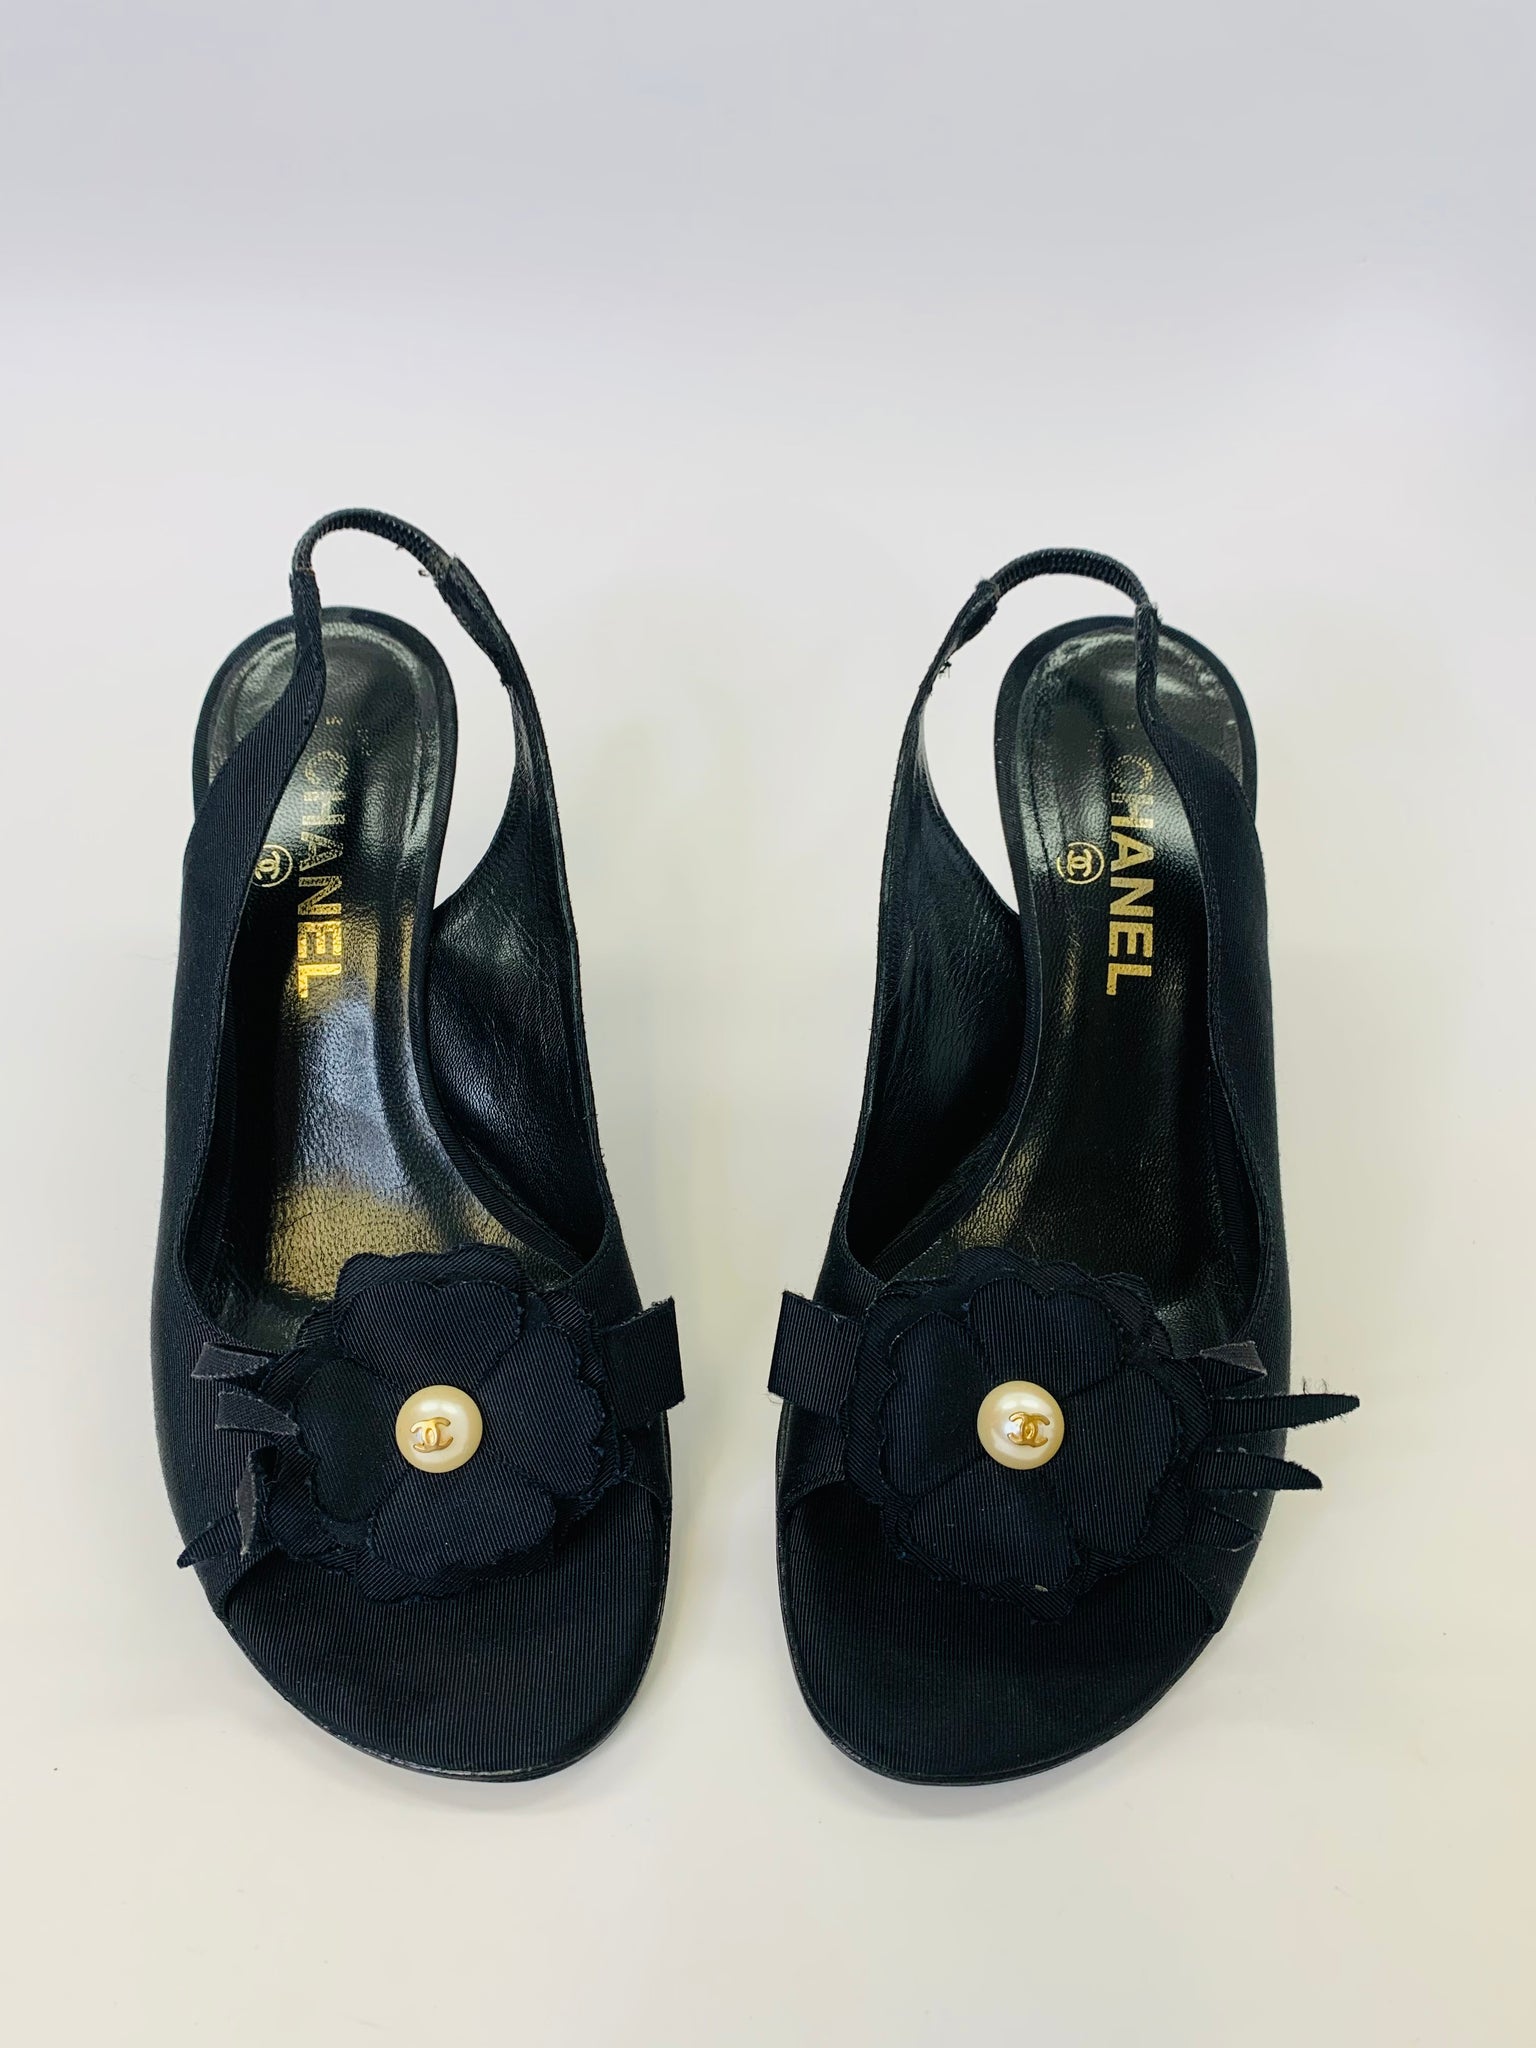 CHANEL Black Grosgrain and Pearl Sandals Size 38 1/2 – JDEX Styles